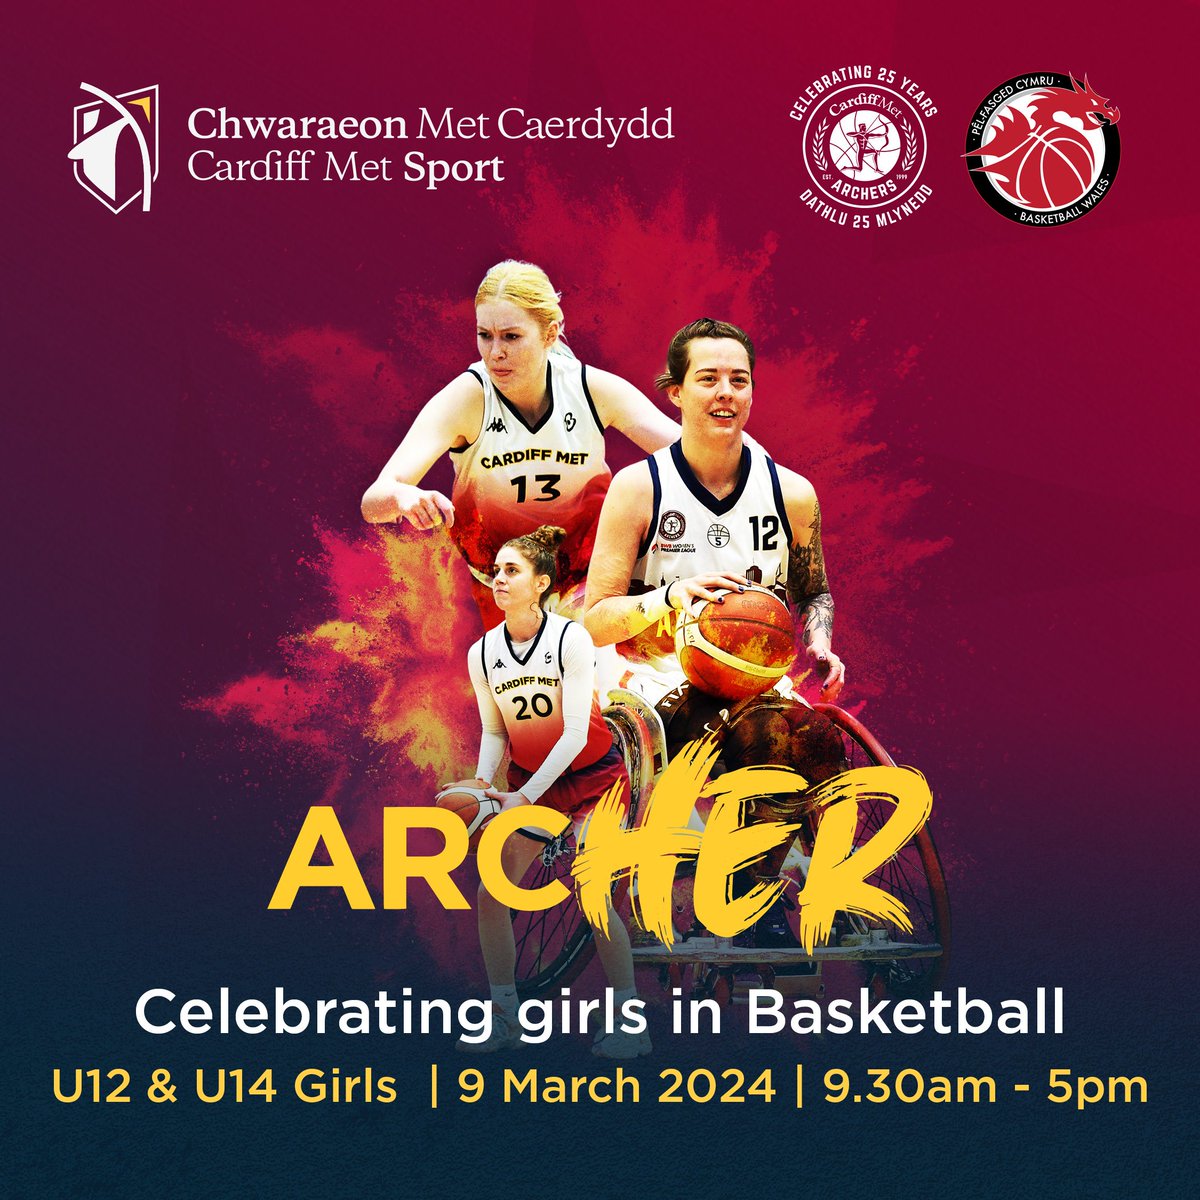 A day full of basketball activities on and off the court for U12 and U14 girls. 🗓 9 March (9.30am - 5.00pm) 📍Archers' Arena, Cardiff #InternationalWomensDay #ArcHERS #FIBAYDF #HerWorldHerRules Includes @ArchersBasket game v @McrGiants Sign up ➡️ forms.office.com/Pages/Response…